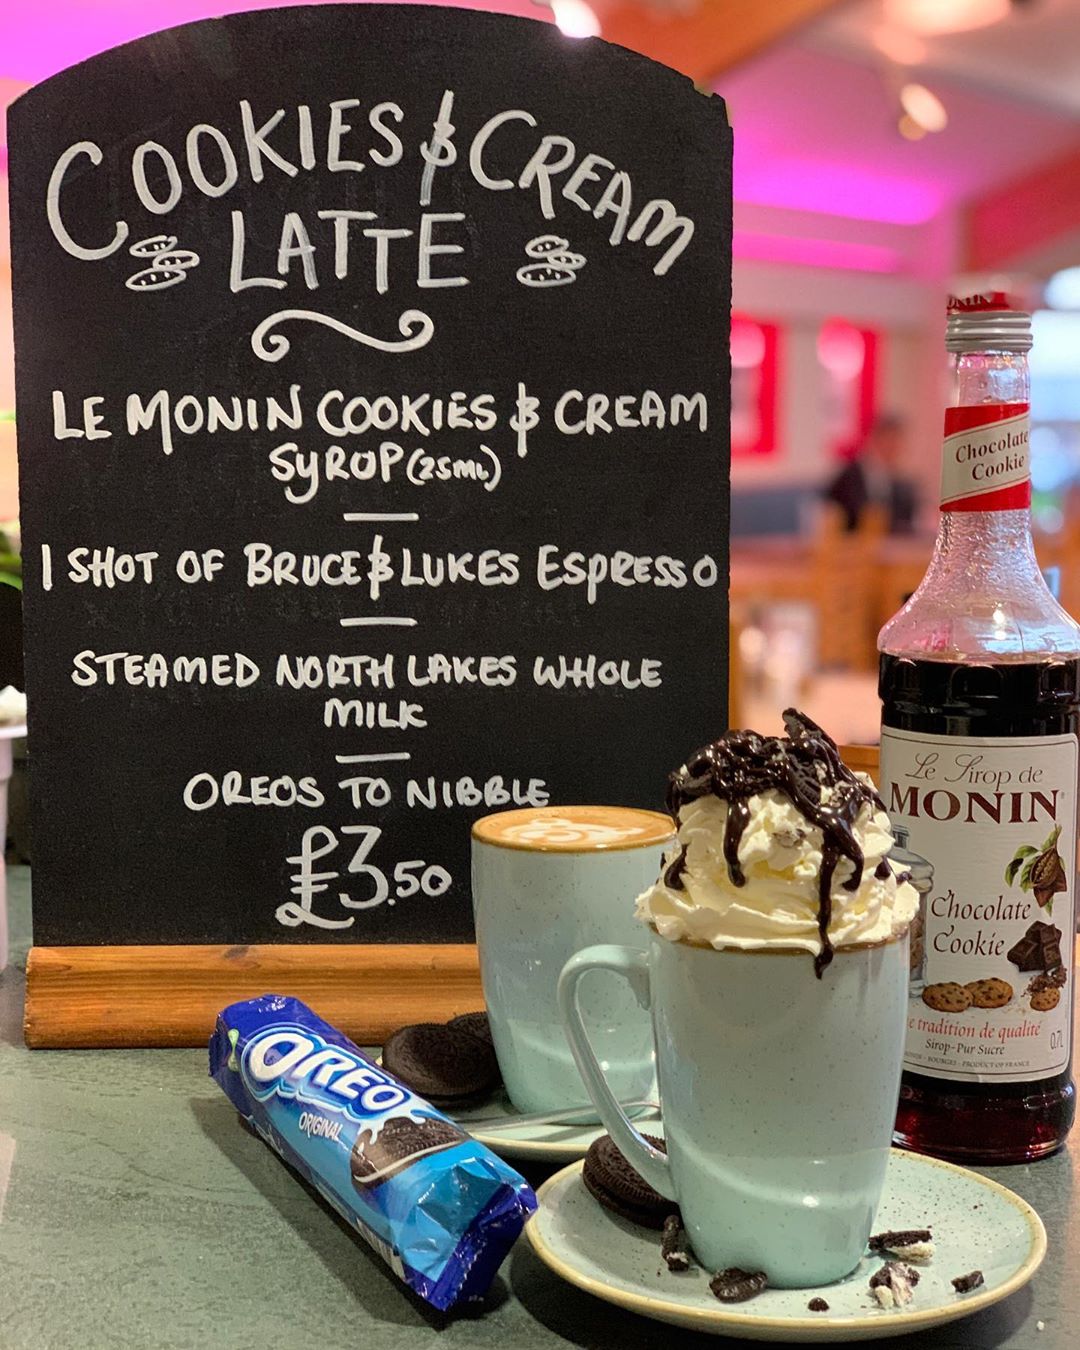 It’s International Coffee Day today! So we’ve got a sweet treat for you! A cookies and cream latte 🤤🤤 #internationalcoffeeday #coffee #oreos #bruceandlukes